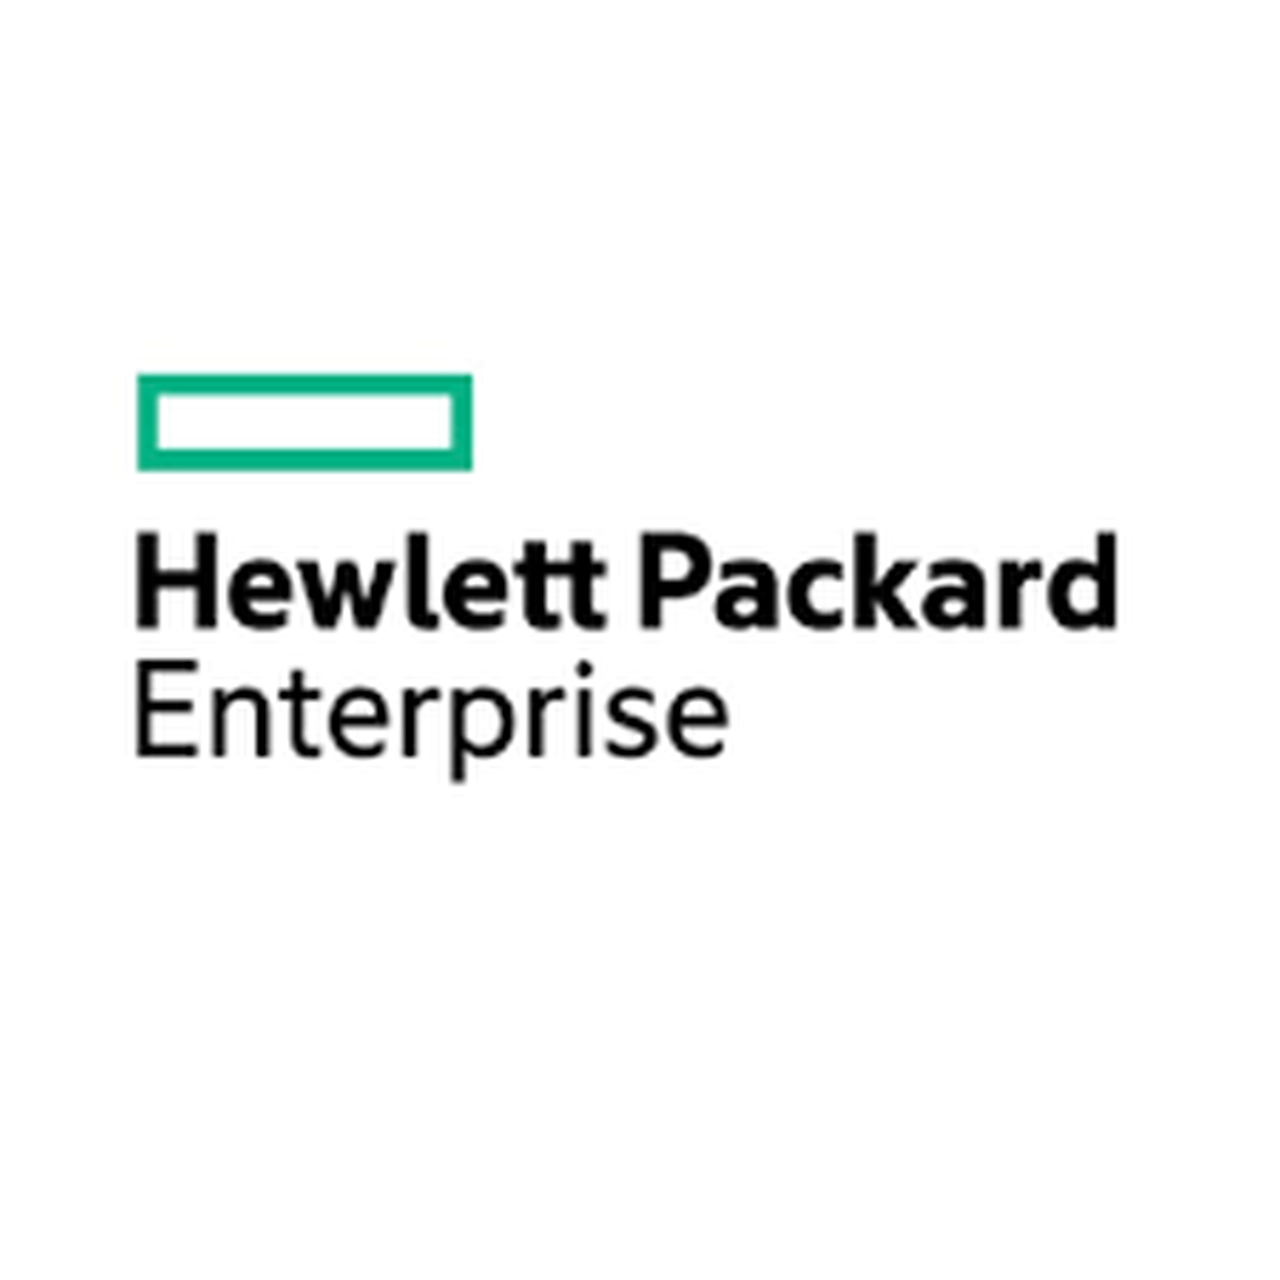 HPE FN 5940 2s 2 Fan 2 PS Bundle Chile - English localization